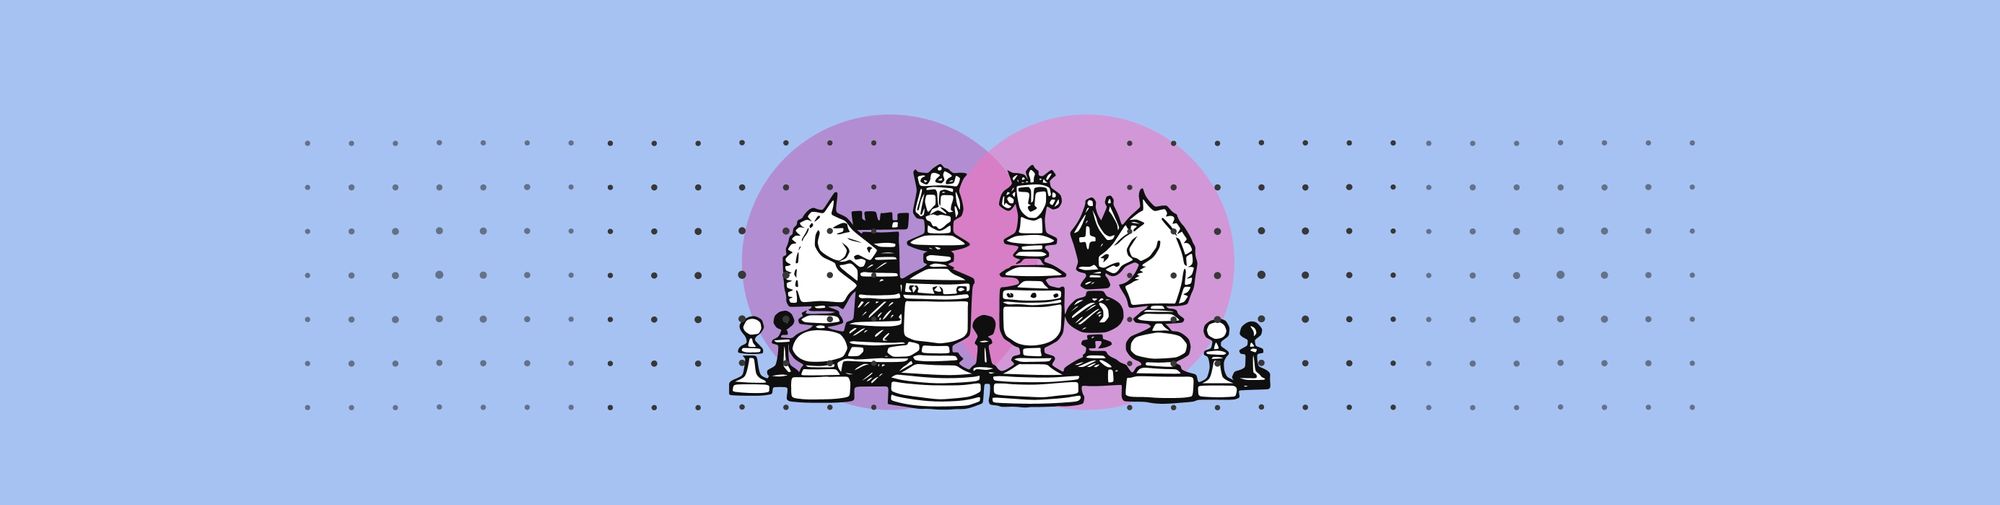 Queen's Gambit for Business: Truly great players think 20 moves ahead